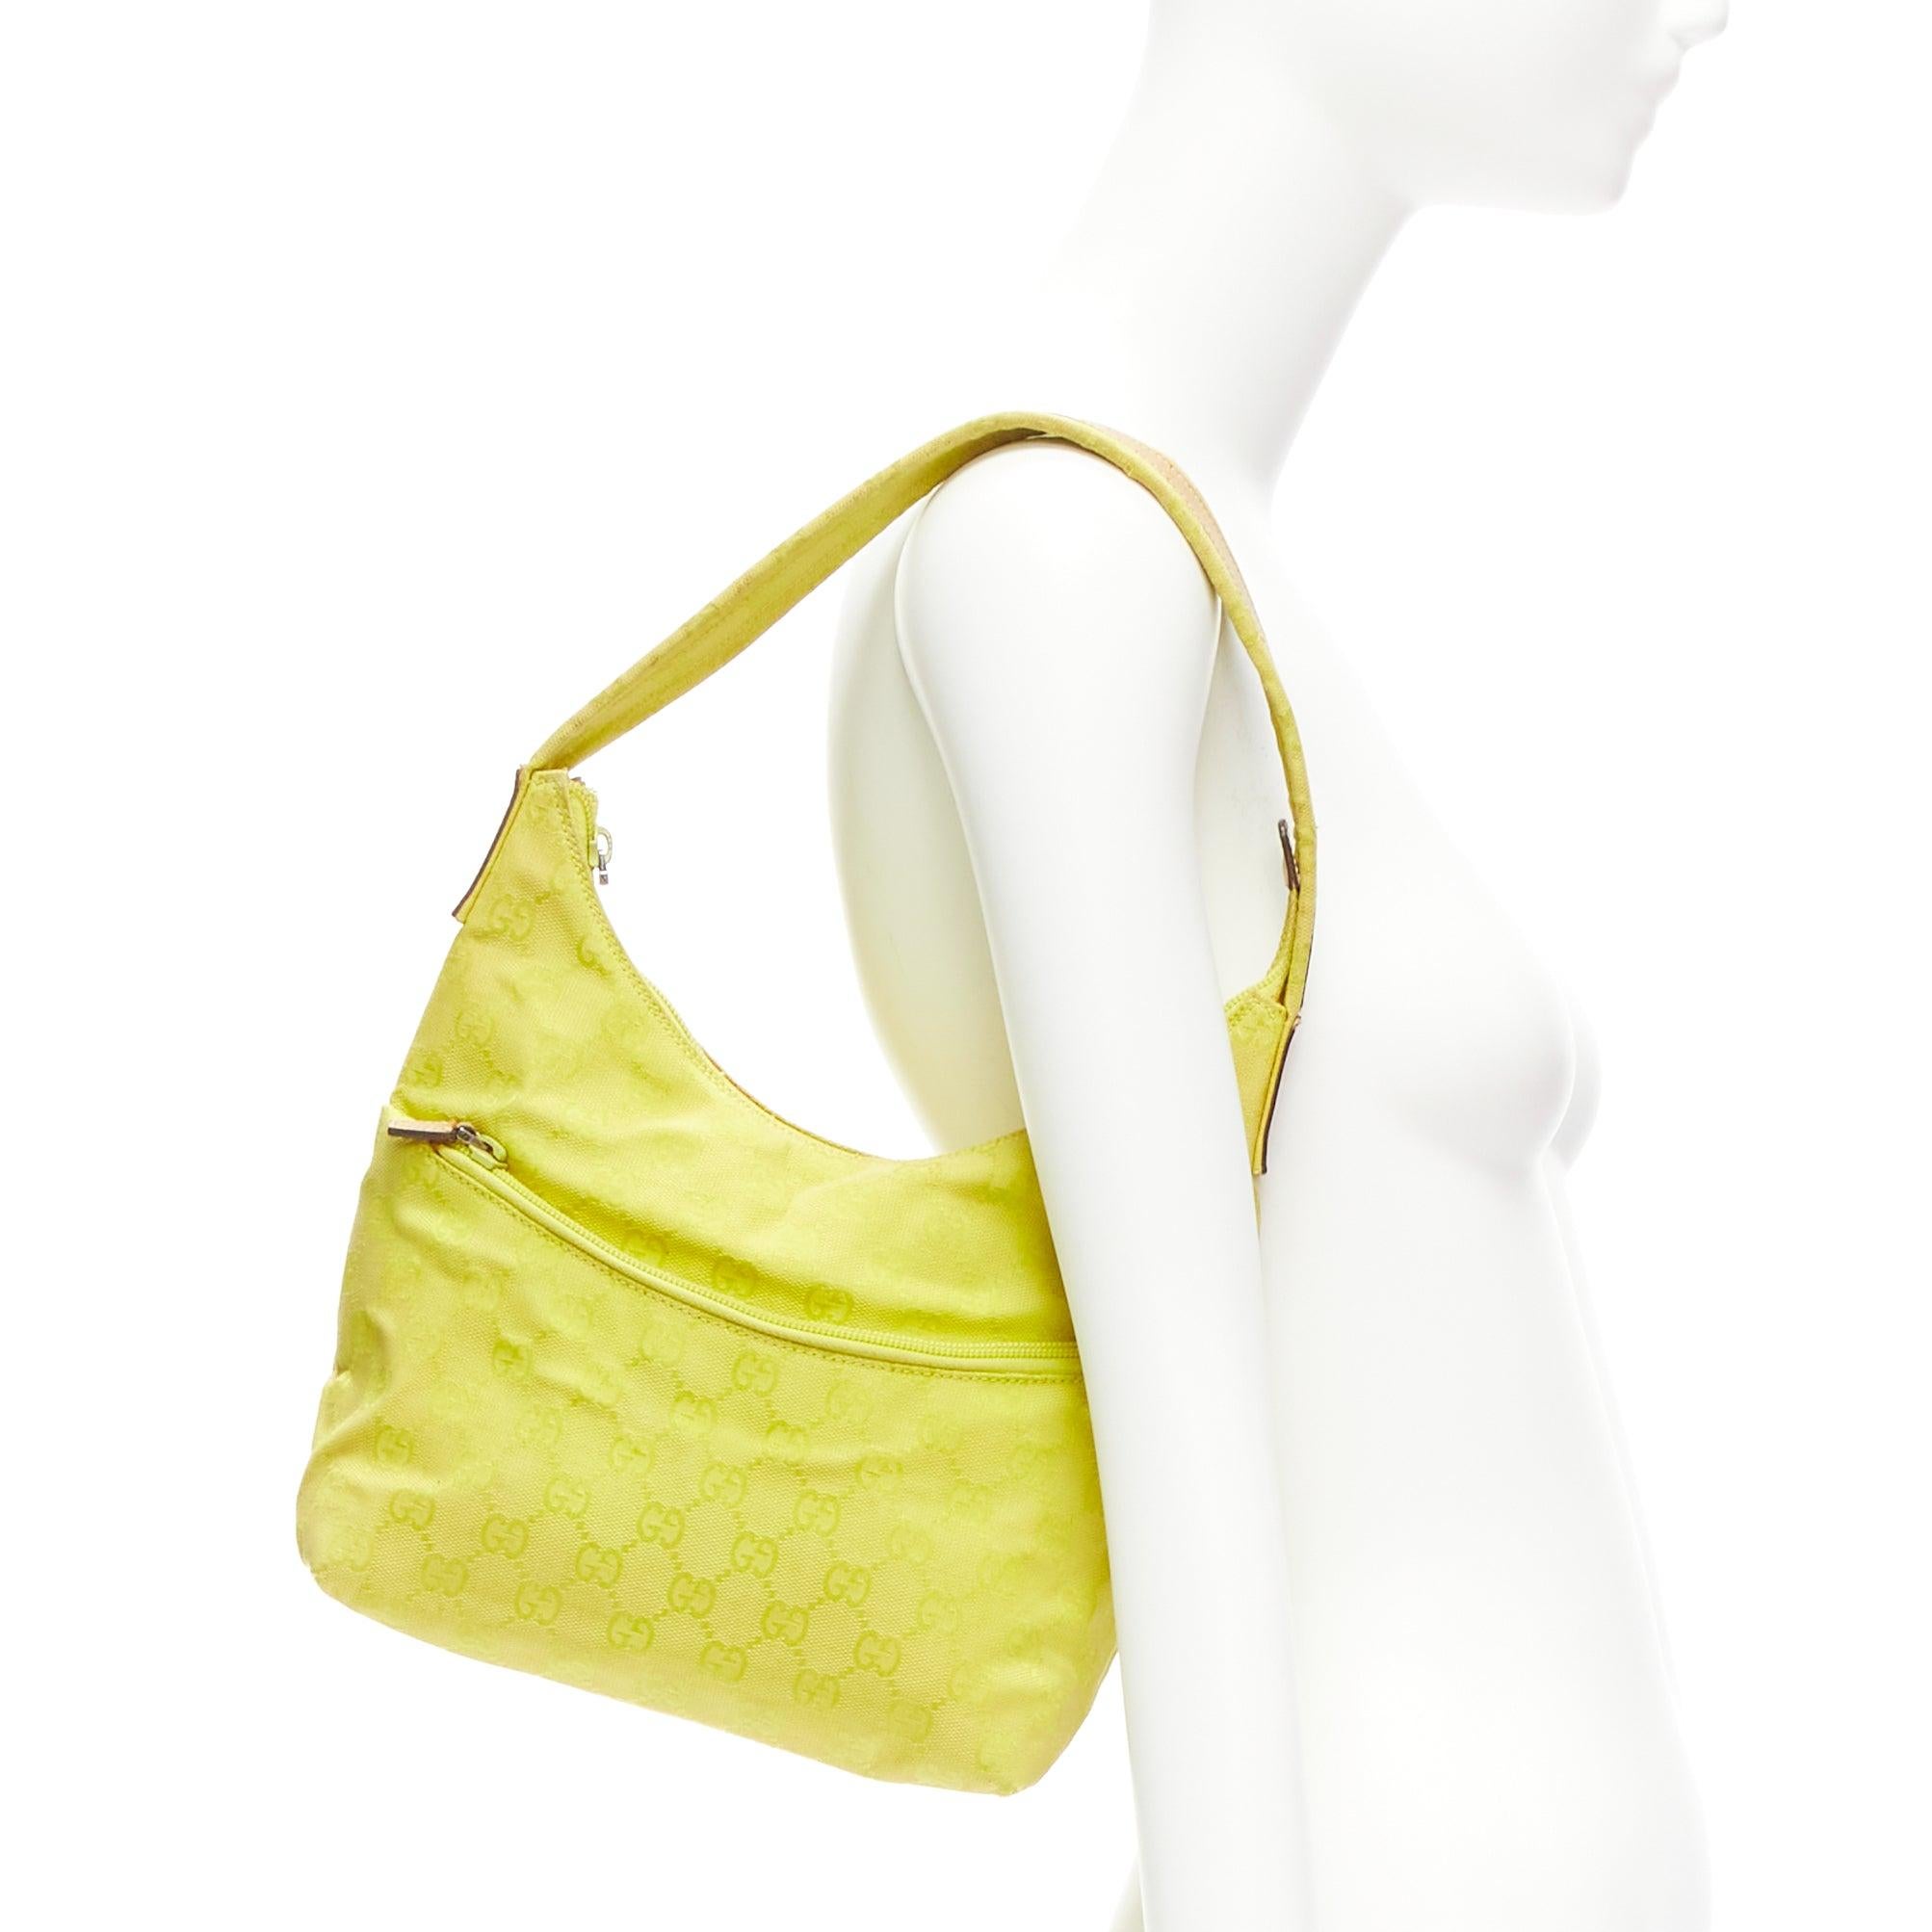 GUCCI Vintage yellow GG monogram canvas small hobo shoulder bag
Reference: KNCN/A00040
Brand: Gucci
Material: Fabric, Leather
Color: Neon Yellow, Brown
Pattern: Monogram
Closure: Zip
Lining: Beige Fabric
Extra Details: This hobo bag features a